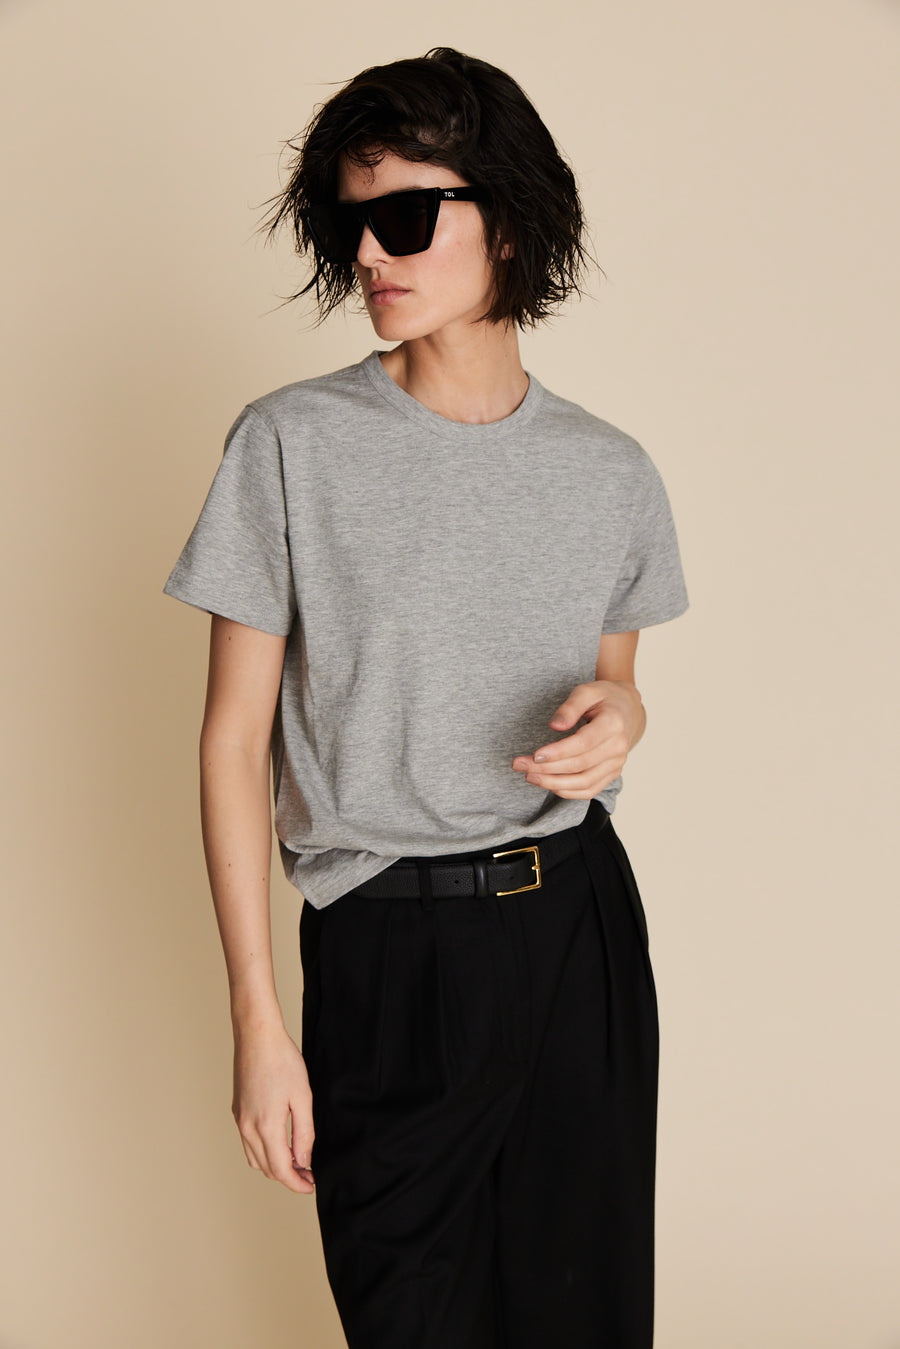 Sold Out Grey Tee Heather Iconically – The Perfect in NYC Soft